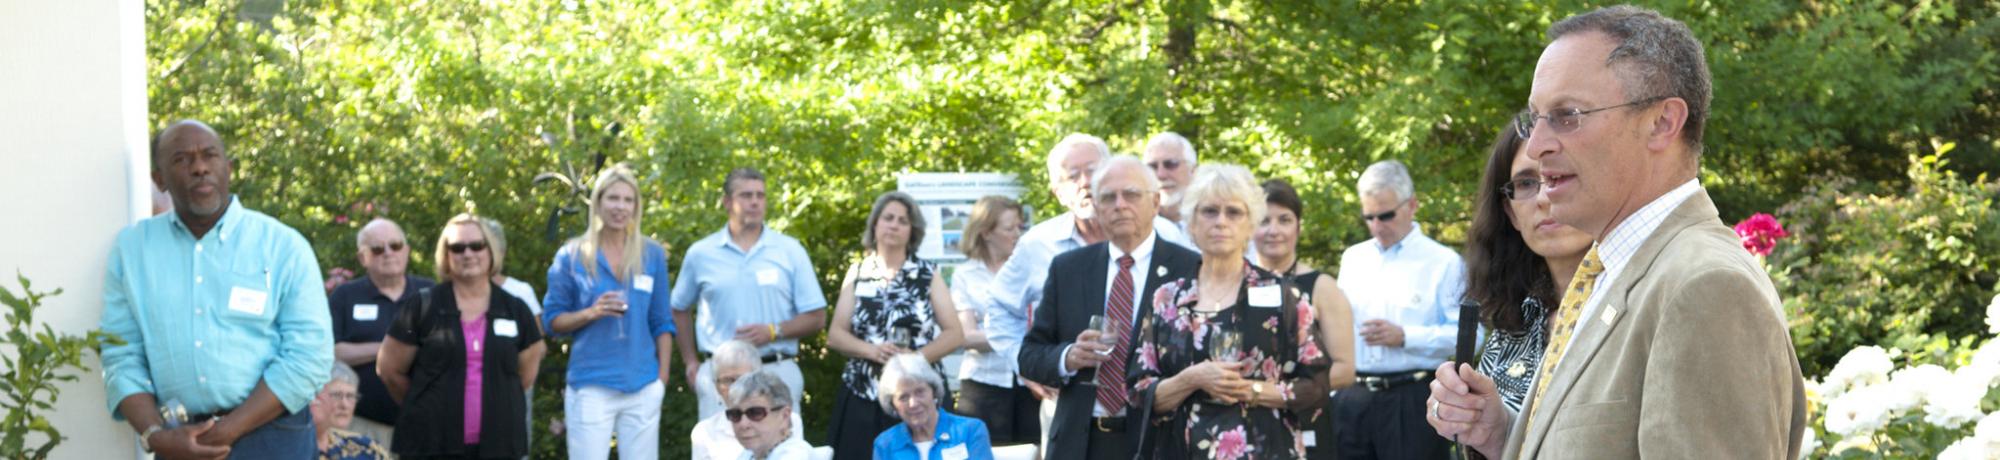 Image of Provost Hexter addressing UC Davis Arboretum and Public Garden donors and members.